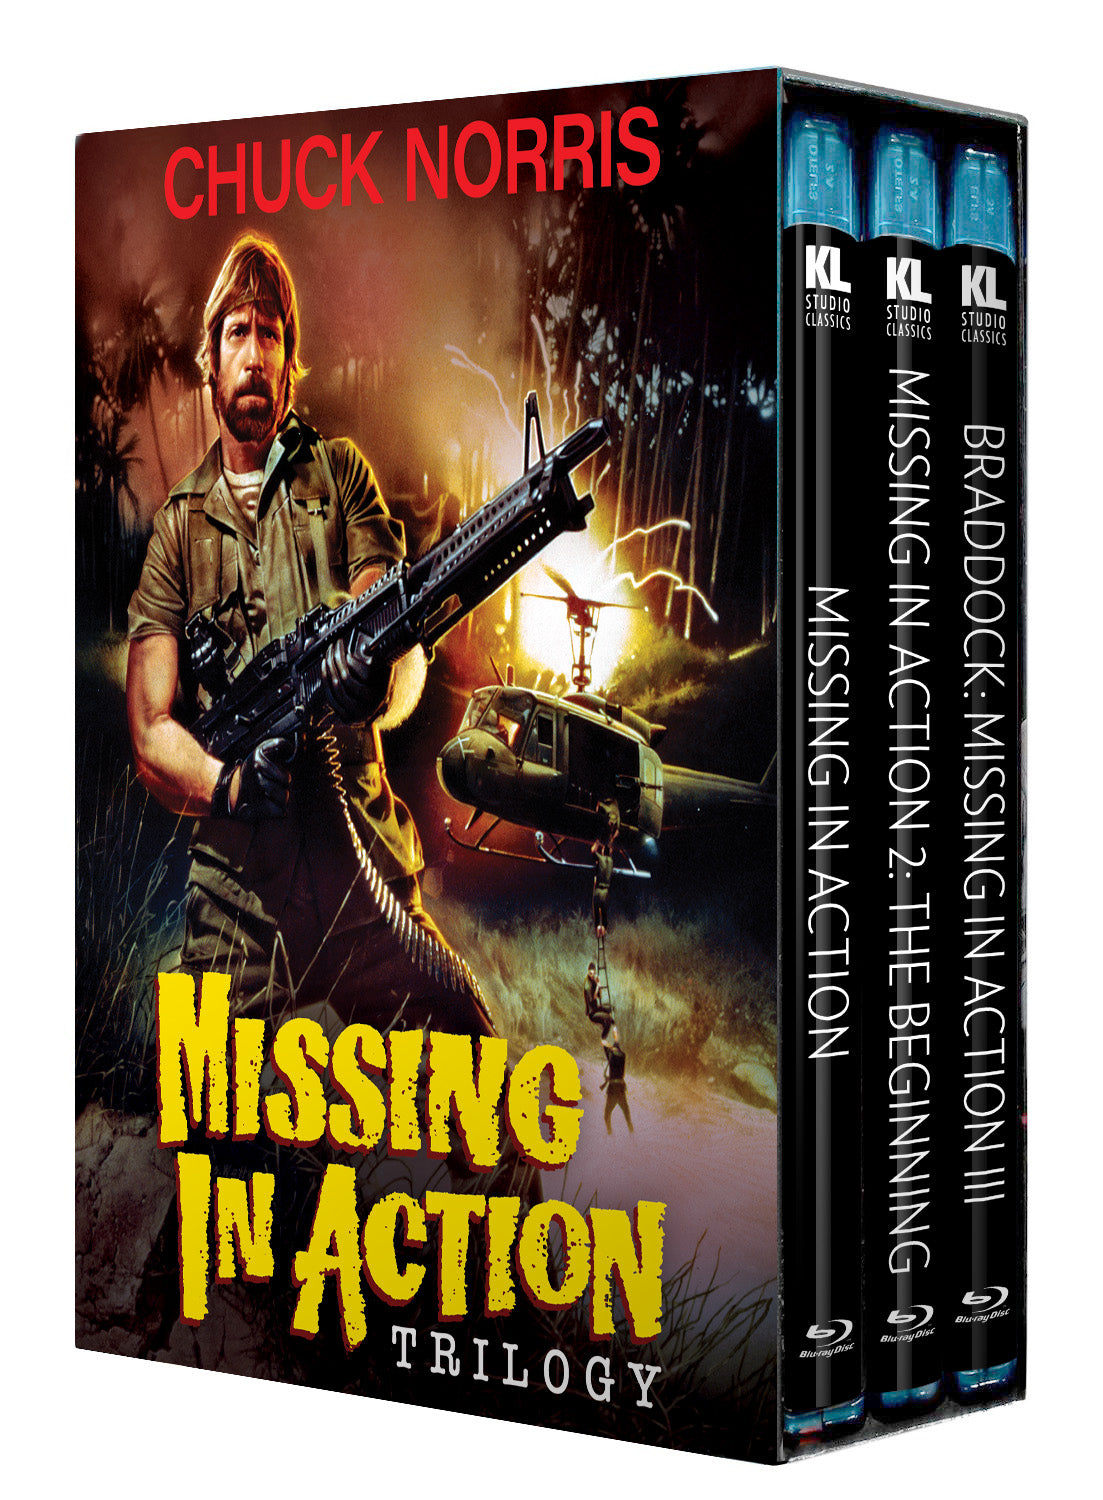 Missing in Action: Trilogy Kino Lorber Blu-Ray Box Set [NEW]